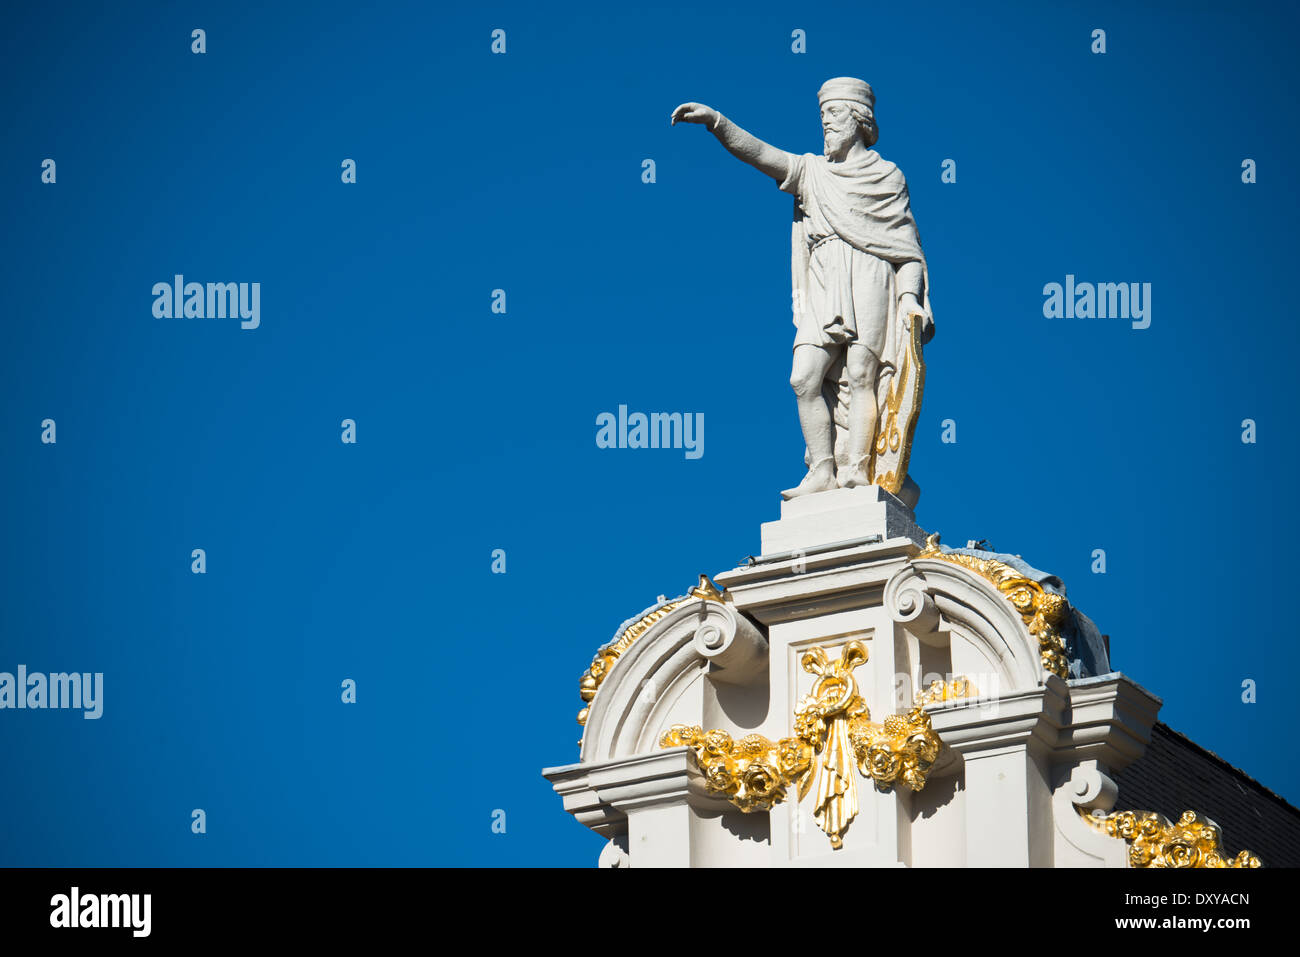 A statue standing on top of one of the hisotric buildings on Grand Place (La Grand-Place), a UNESCO World Heritage Site in central Brussels, Belgium. Lined with ornate, historic buildings, the cobblestone square is the primary tourist attraction in Brussels. Stock Photo